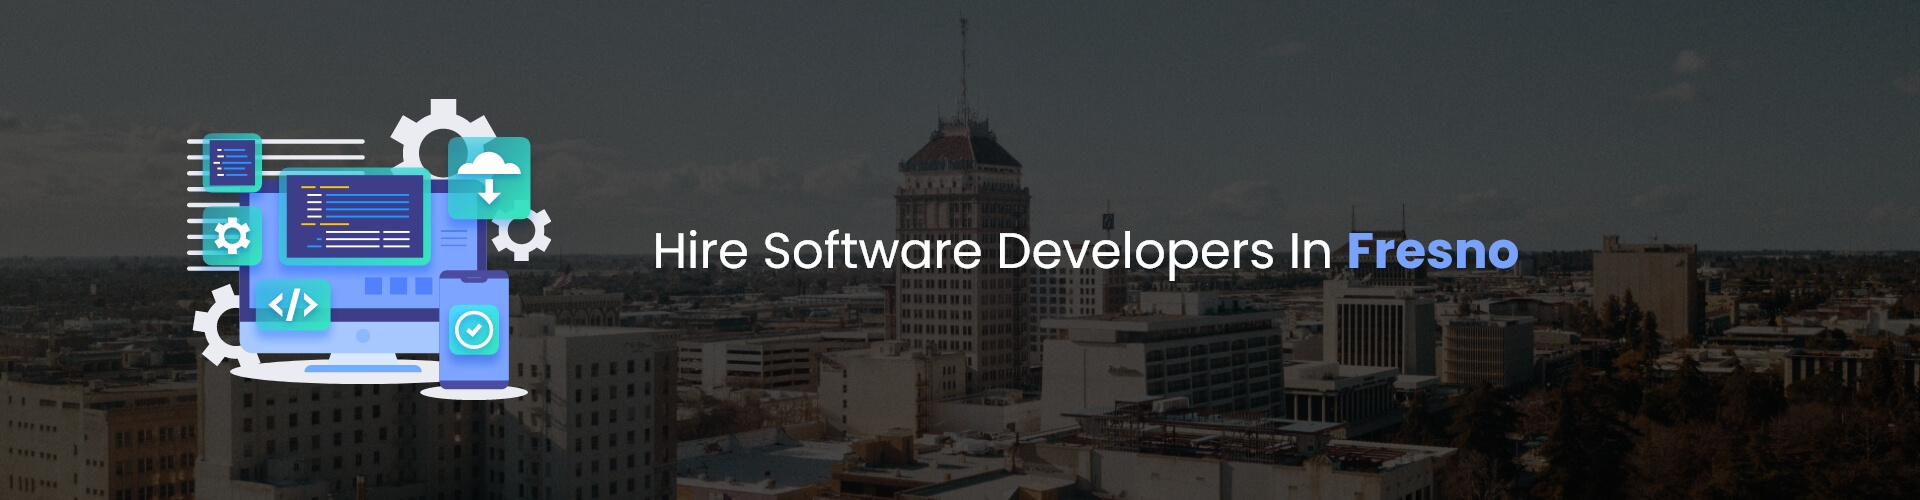 hire software developers in fresno